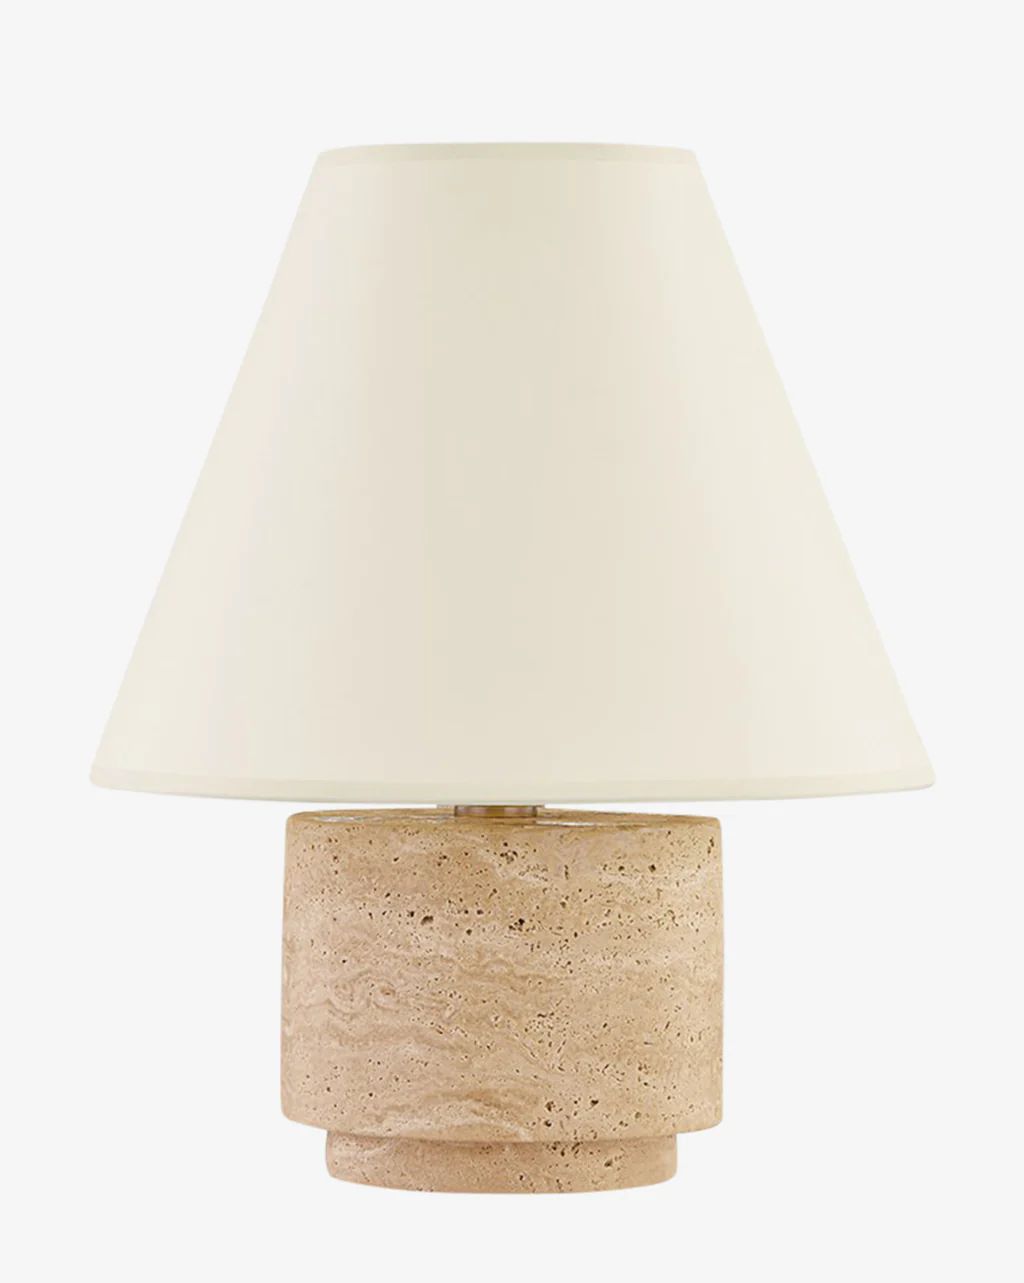 Bronte Table Lamp | McGee & Co.